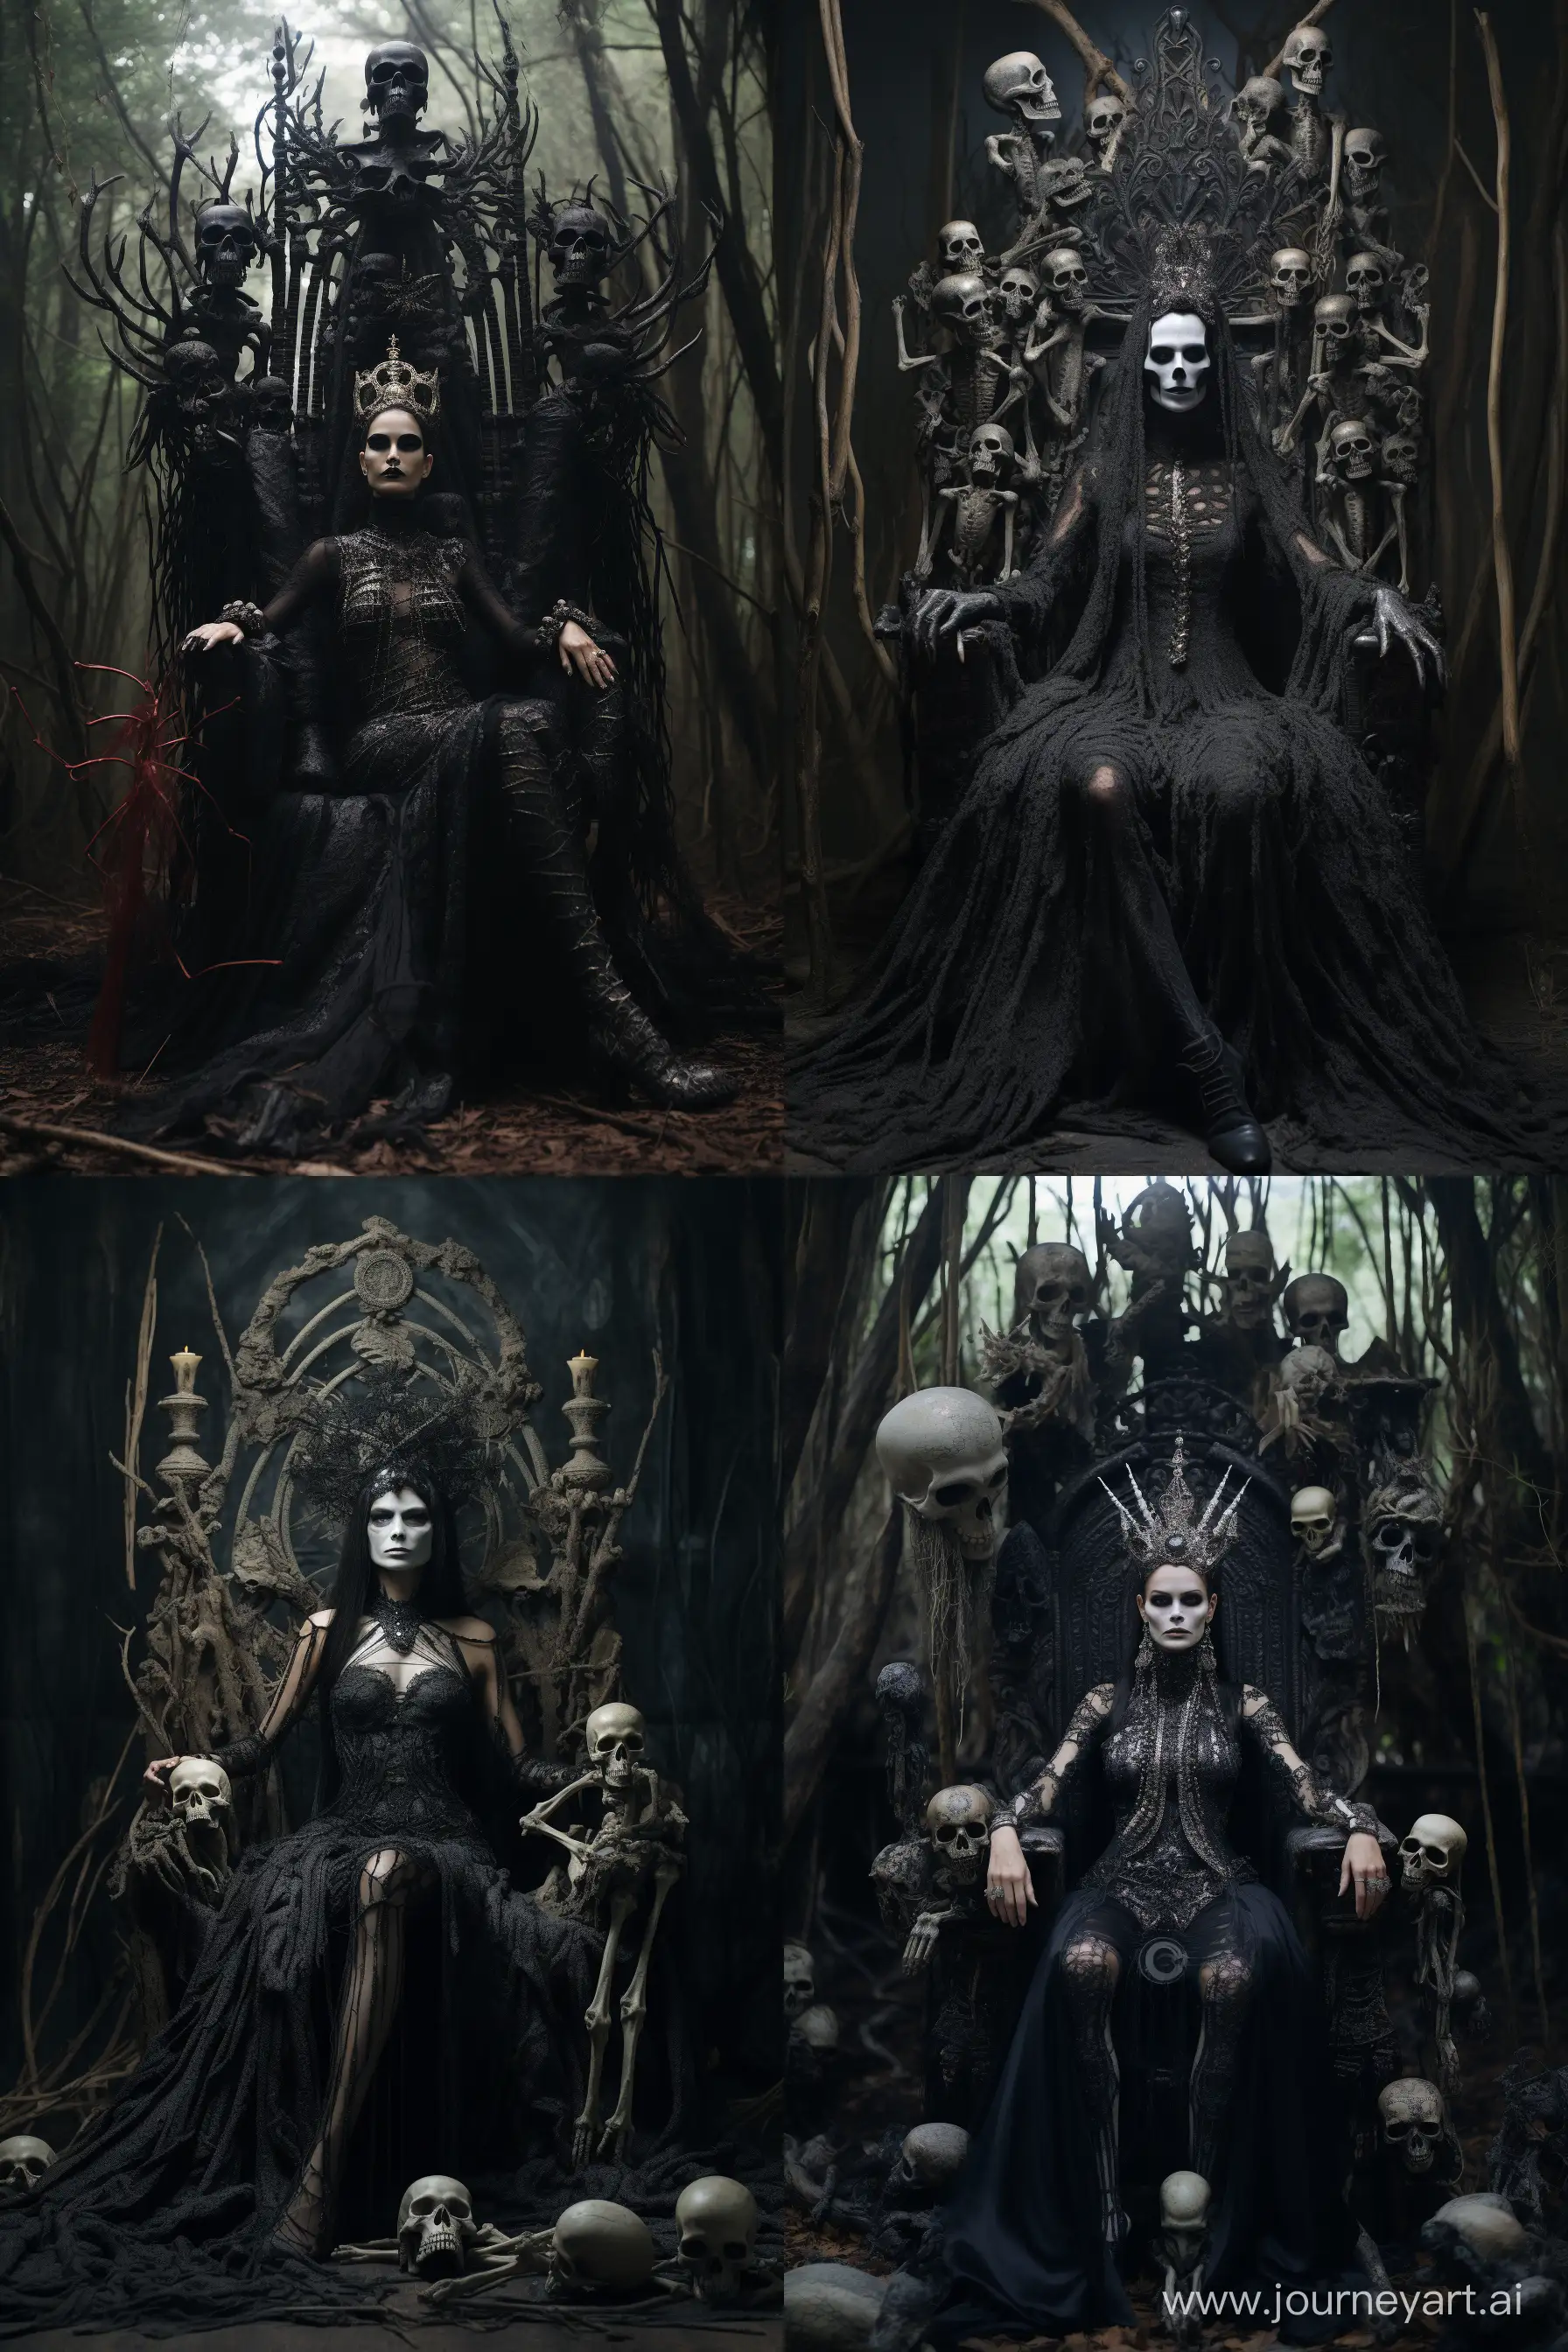 High archived photo of queen sitting on a throne made entirely of bones. She is  wearing an elaborate gothic headpiece and full black lace gown. Behind her,  a tall ominous skeleton stands wearing a robe with cryptic writing. The setting is a minimalistic creepy forest, hassleblad --ar 2:3